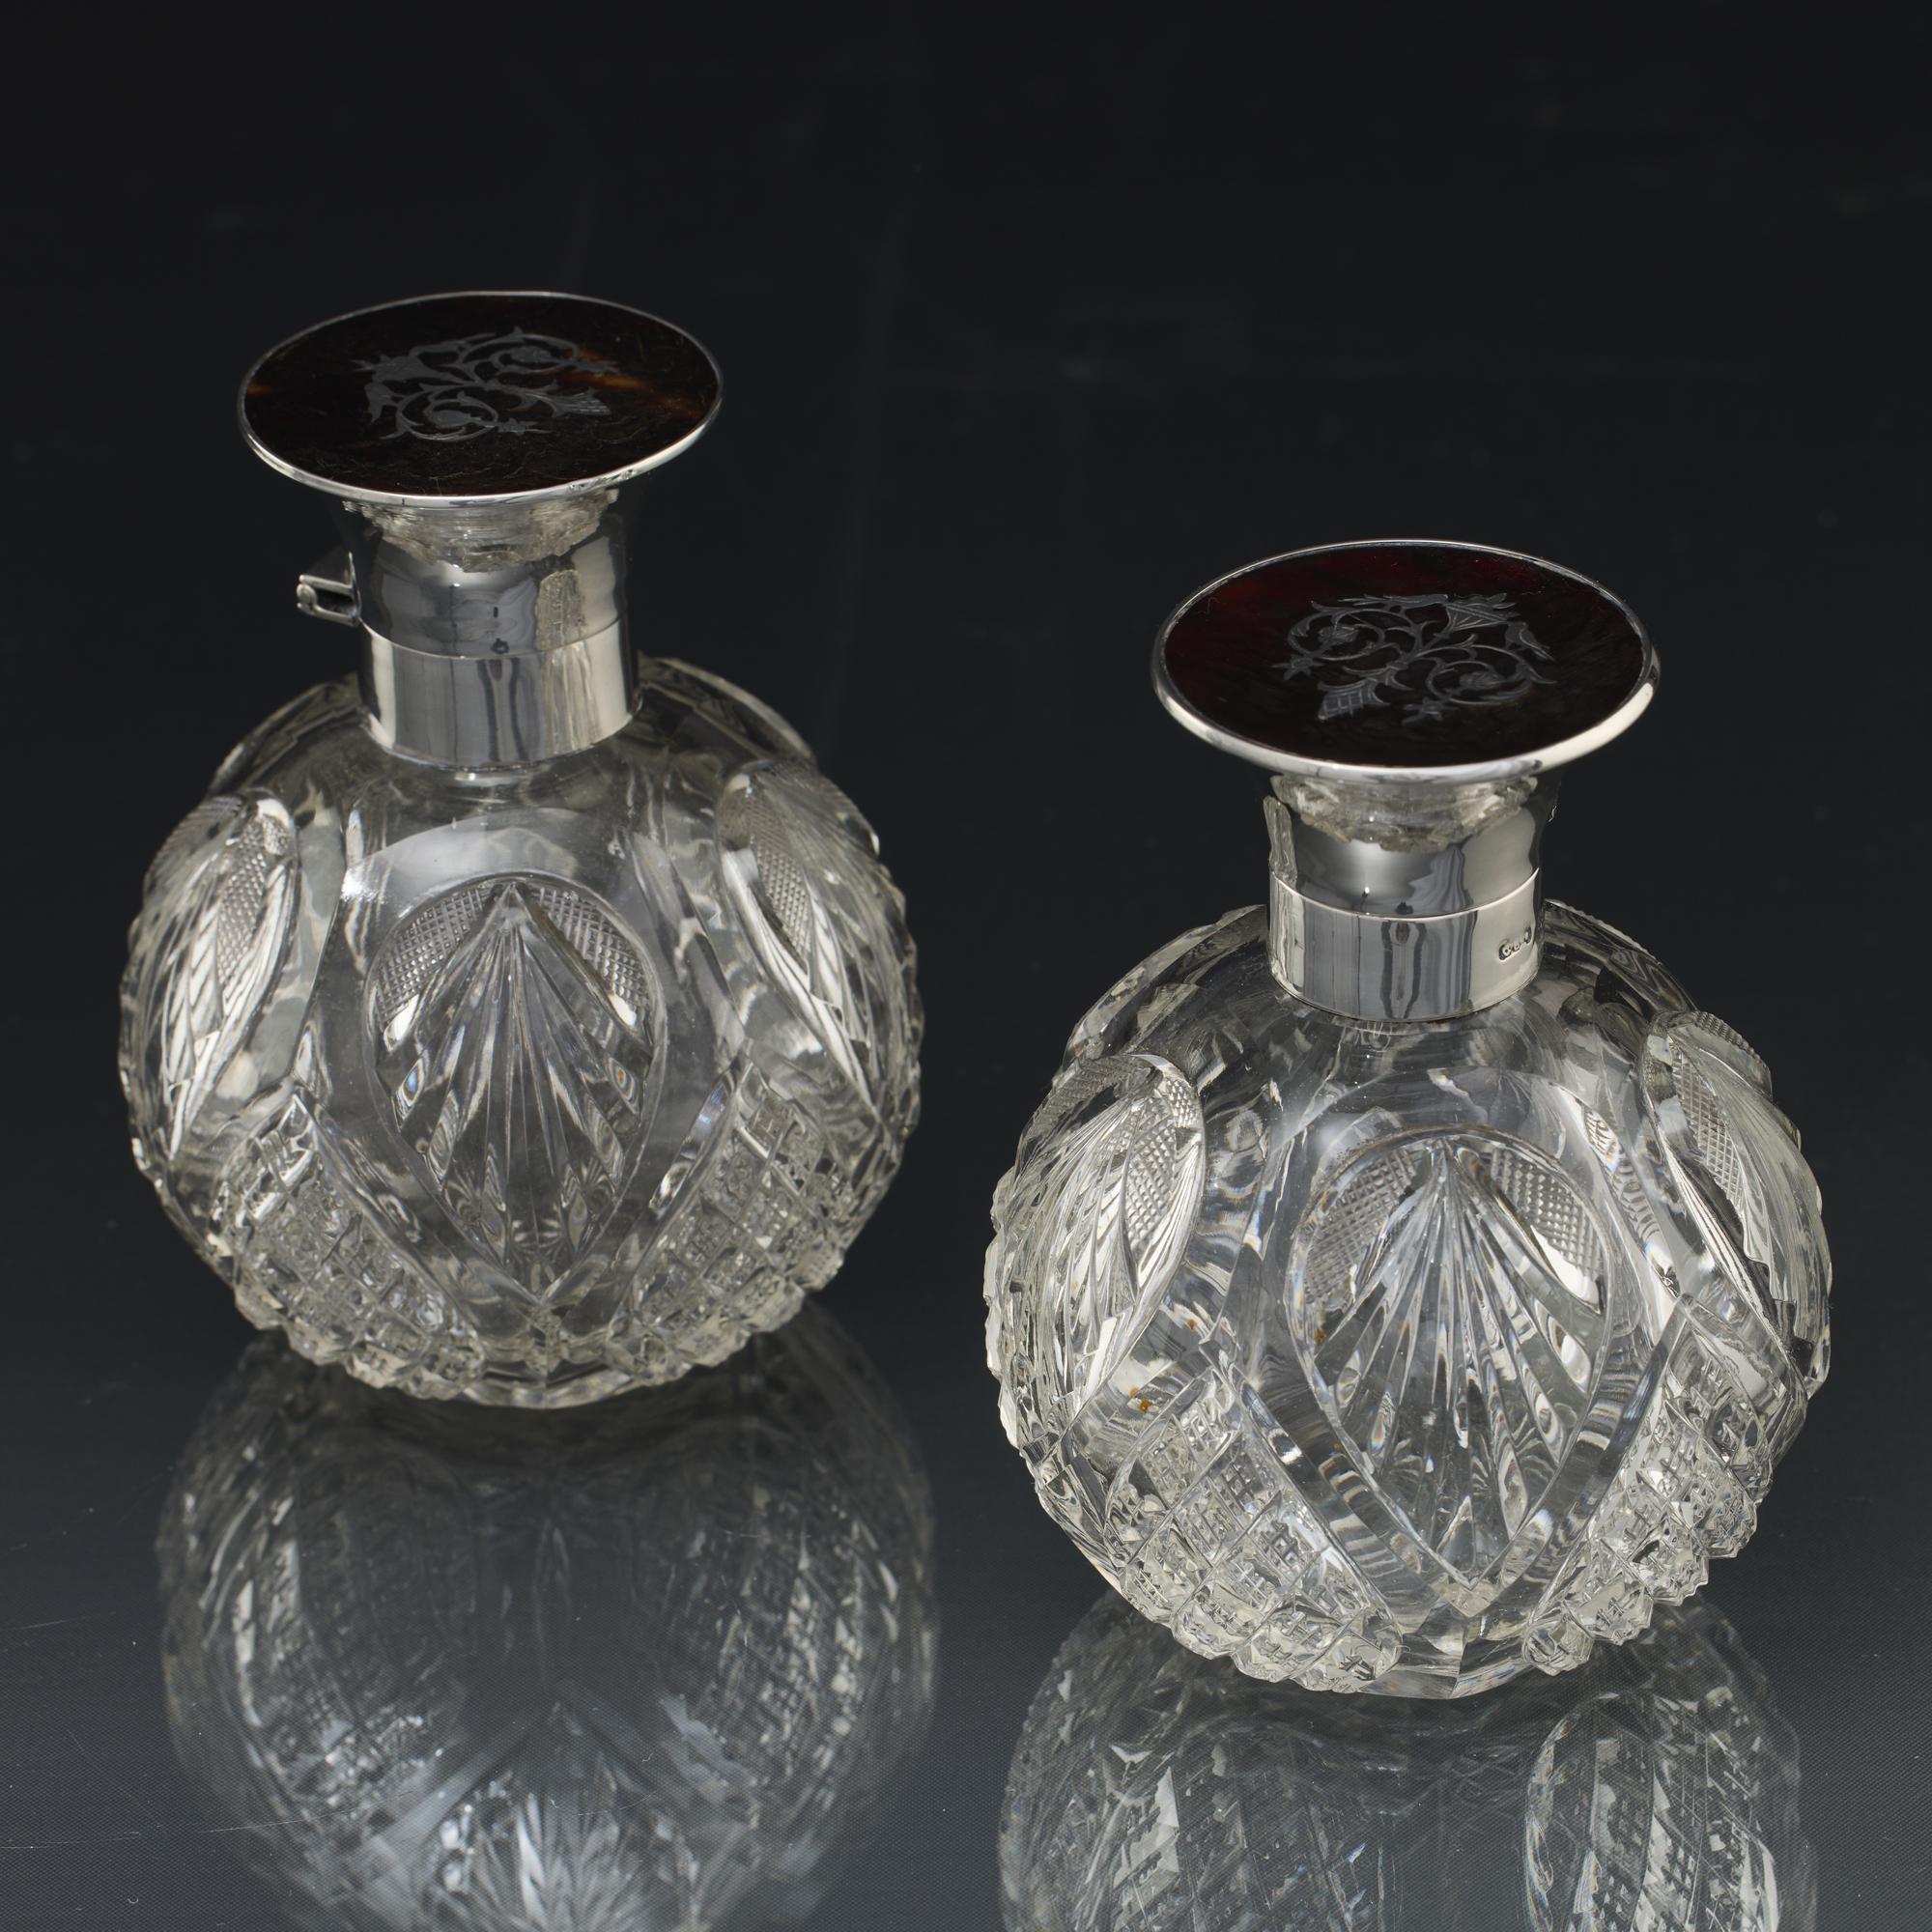 A pair of early-20th-century antique perfume or scent bottles with hand-cut glass bodies decorated with lattice and fanned flute panels, as well as sections of diamond pattern. There is a starburst cut into each base. The bottles have silver